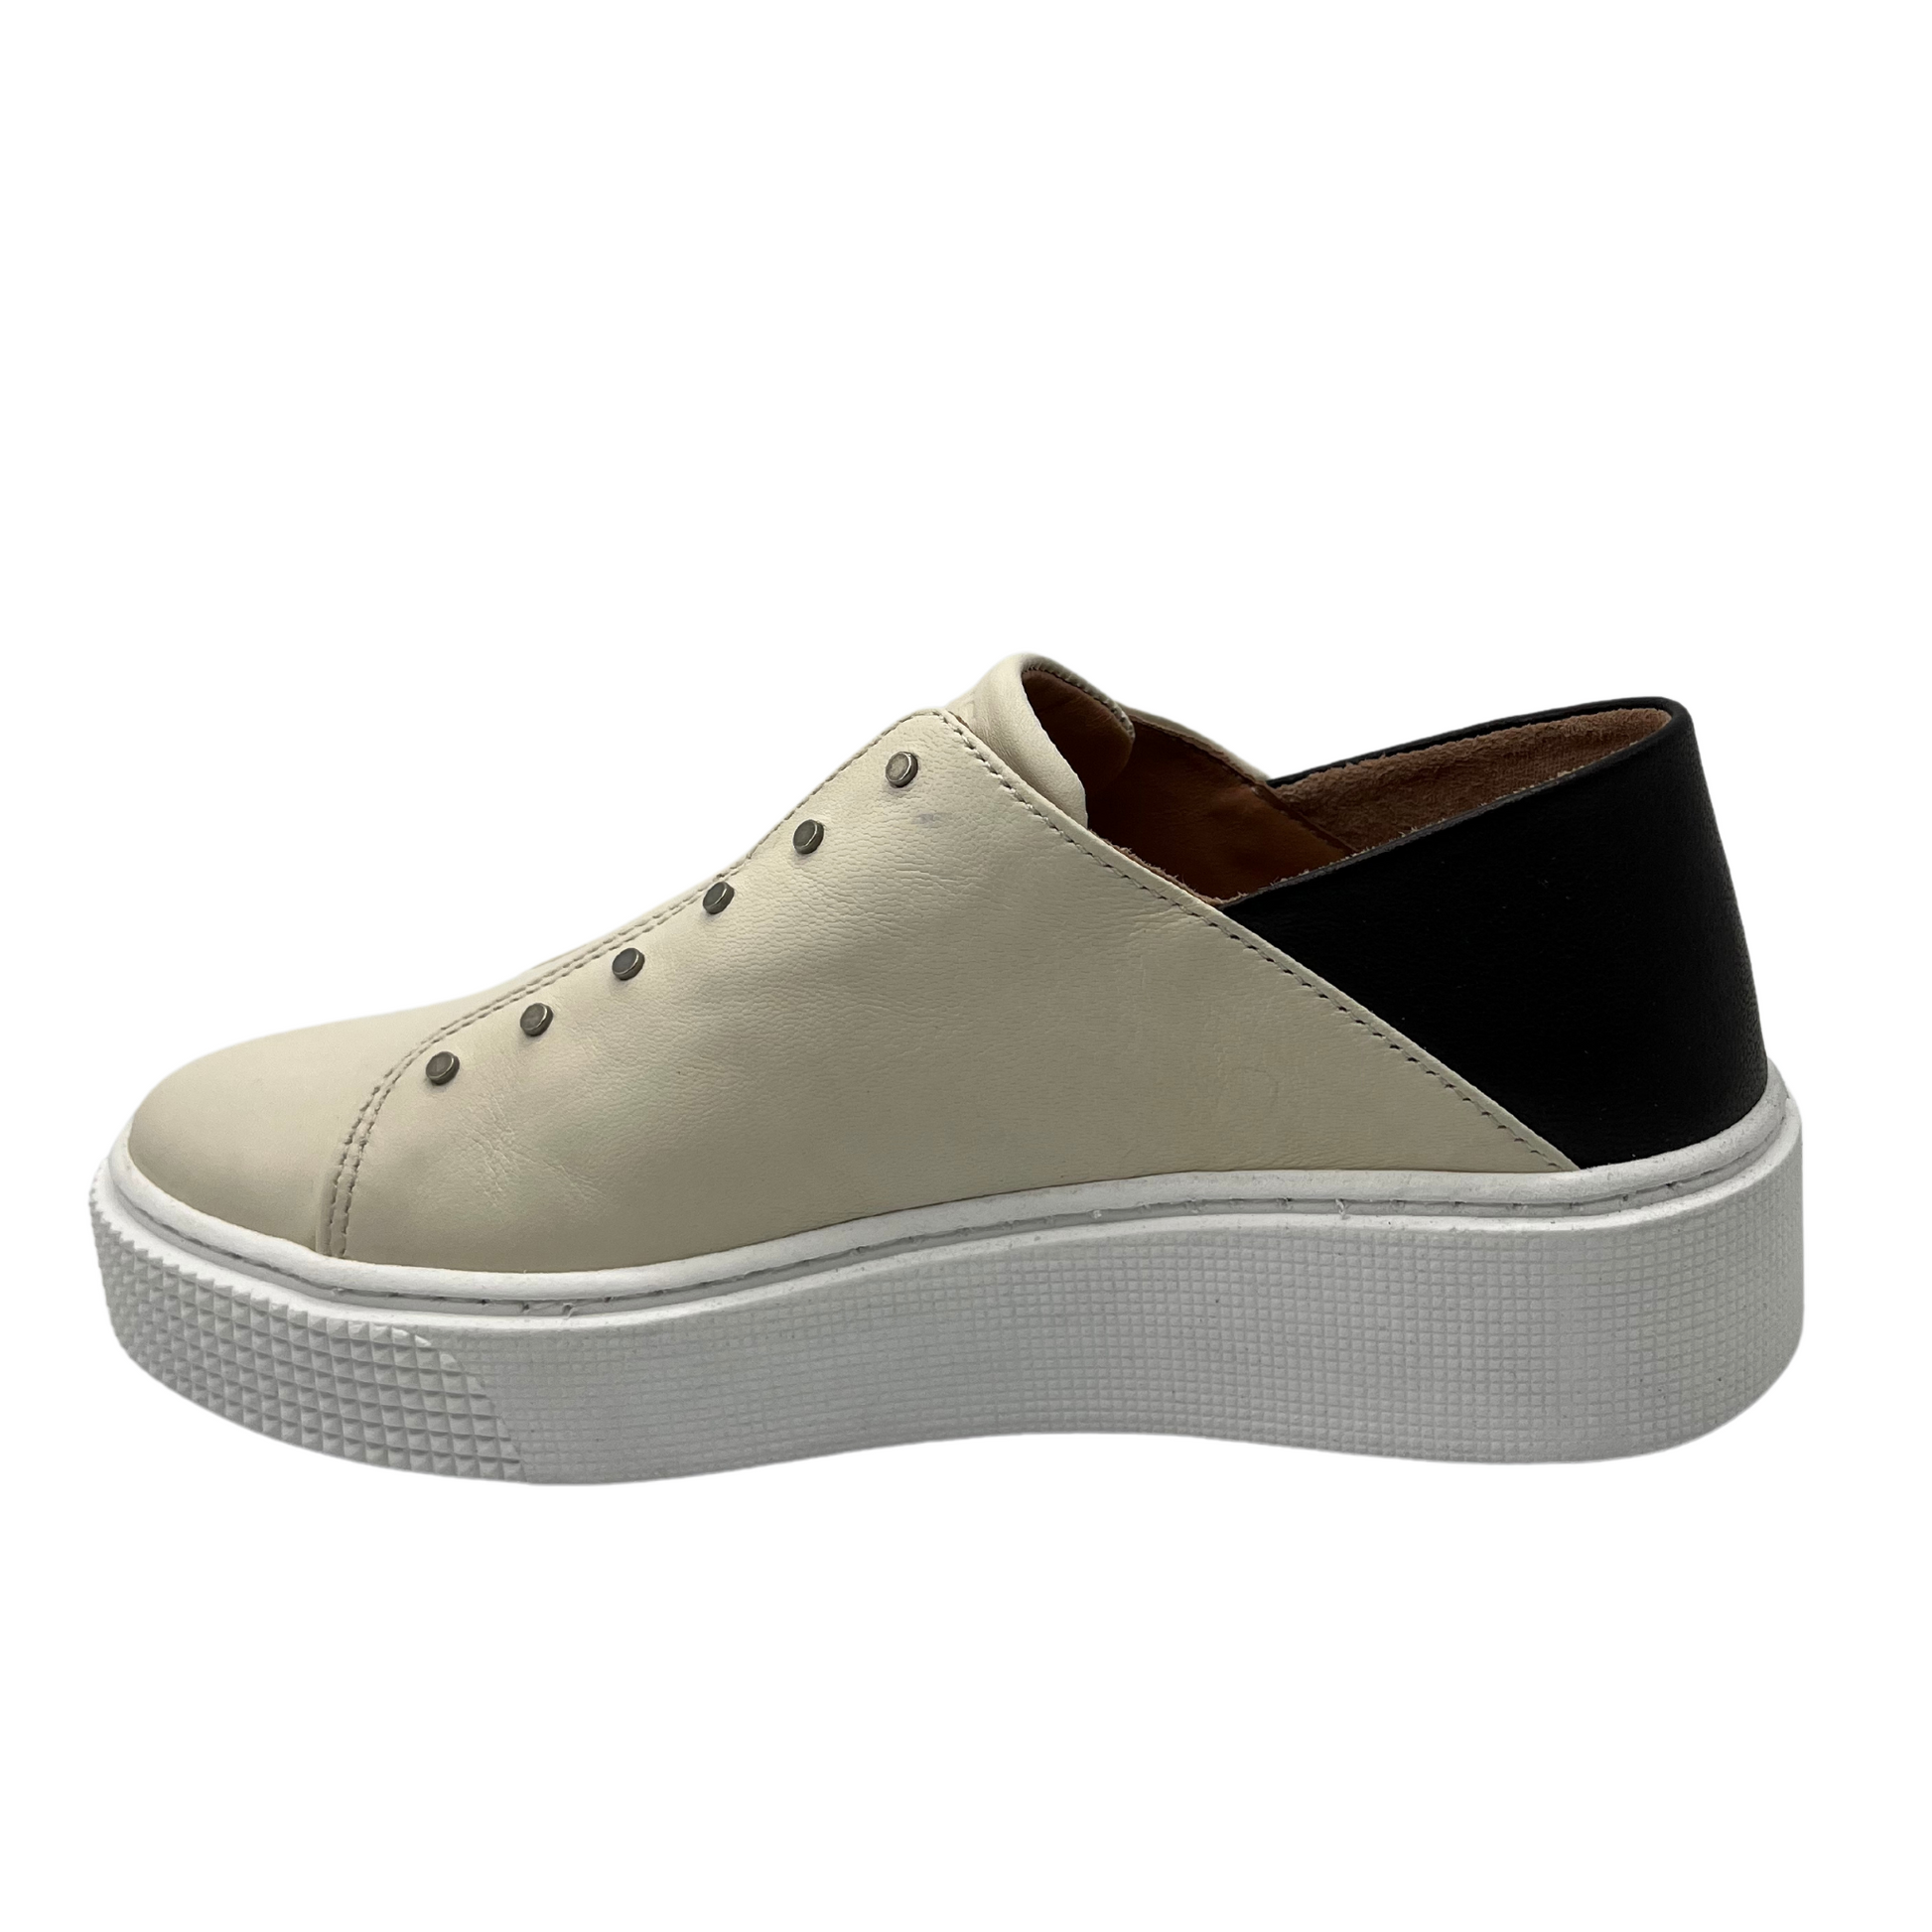 Left view of latte coloured sneaker with black heel detail and white rubber outsole